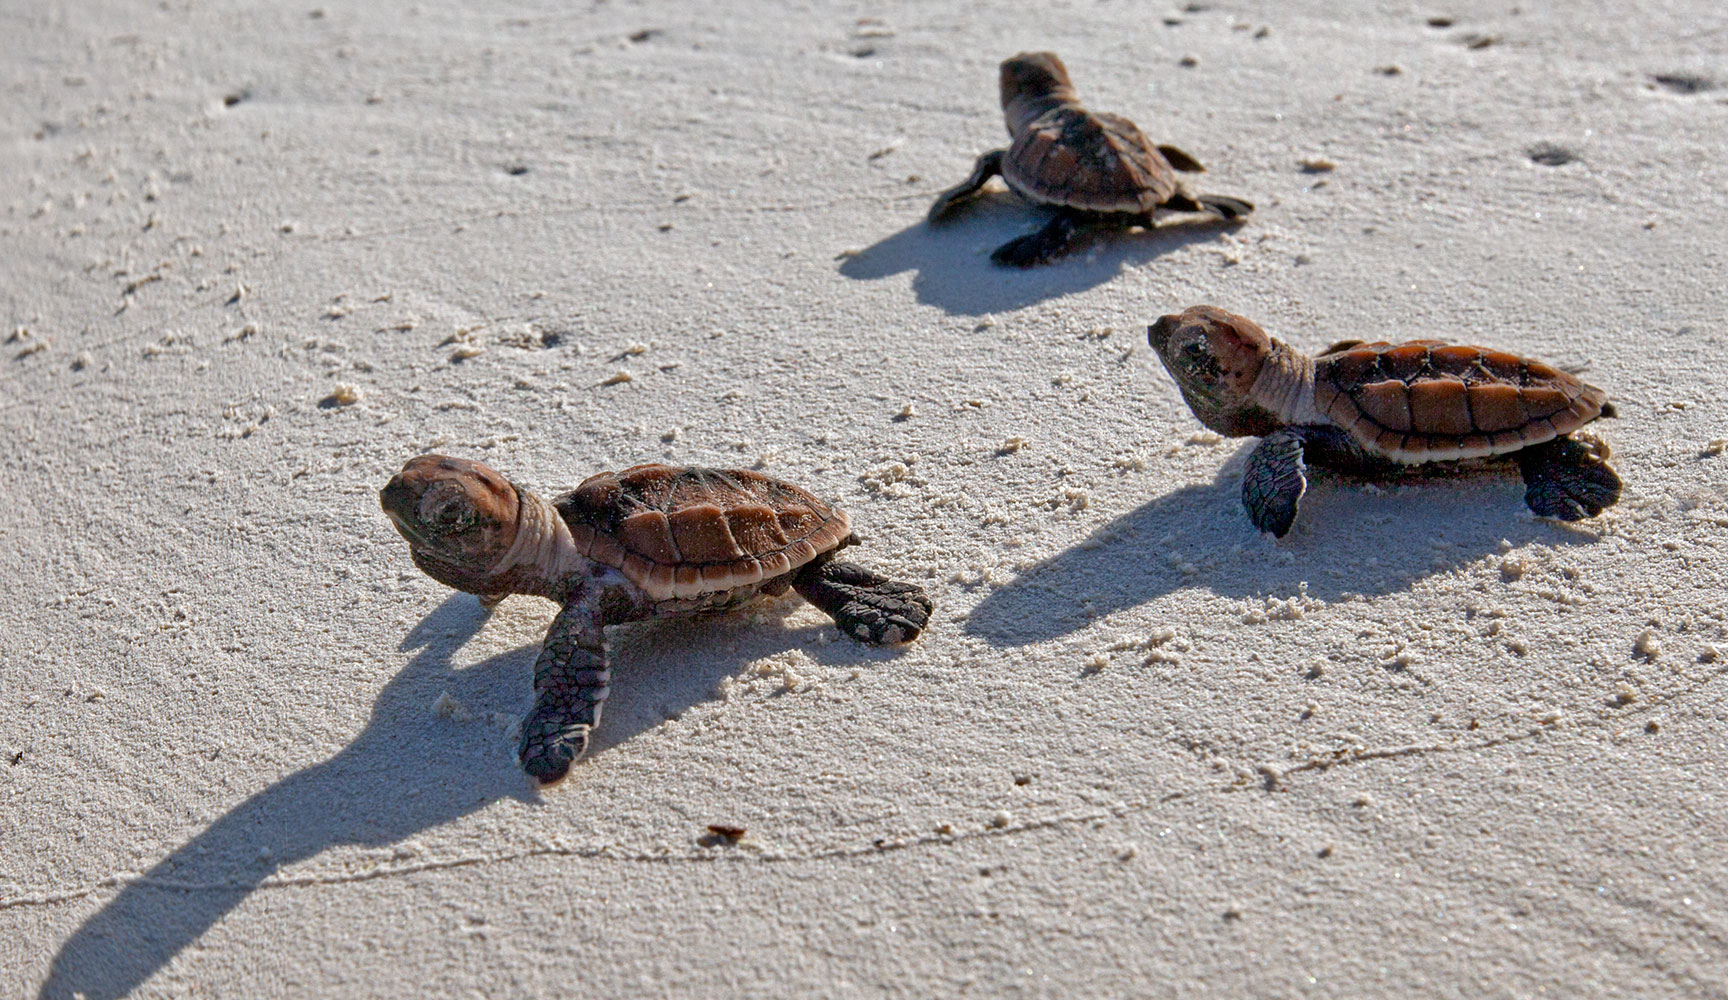 Hatchlings of Critically Endangered hawksbill sea turtles (Eretmochelys imbricata) in a nesting beach at Bonaire, Caribbean Netherlands